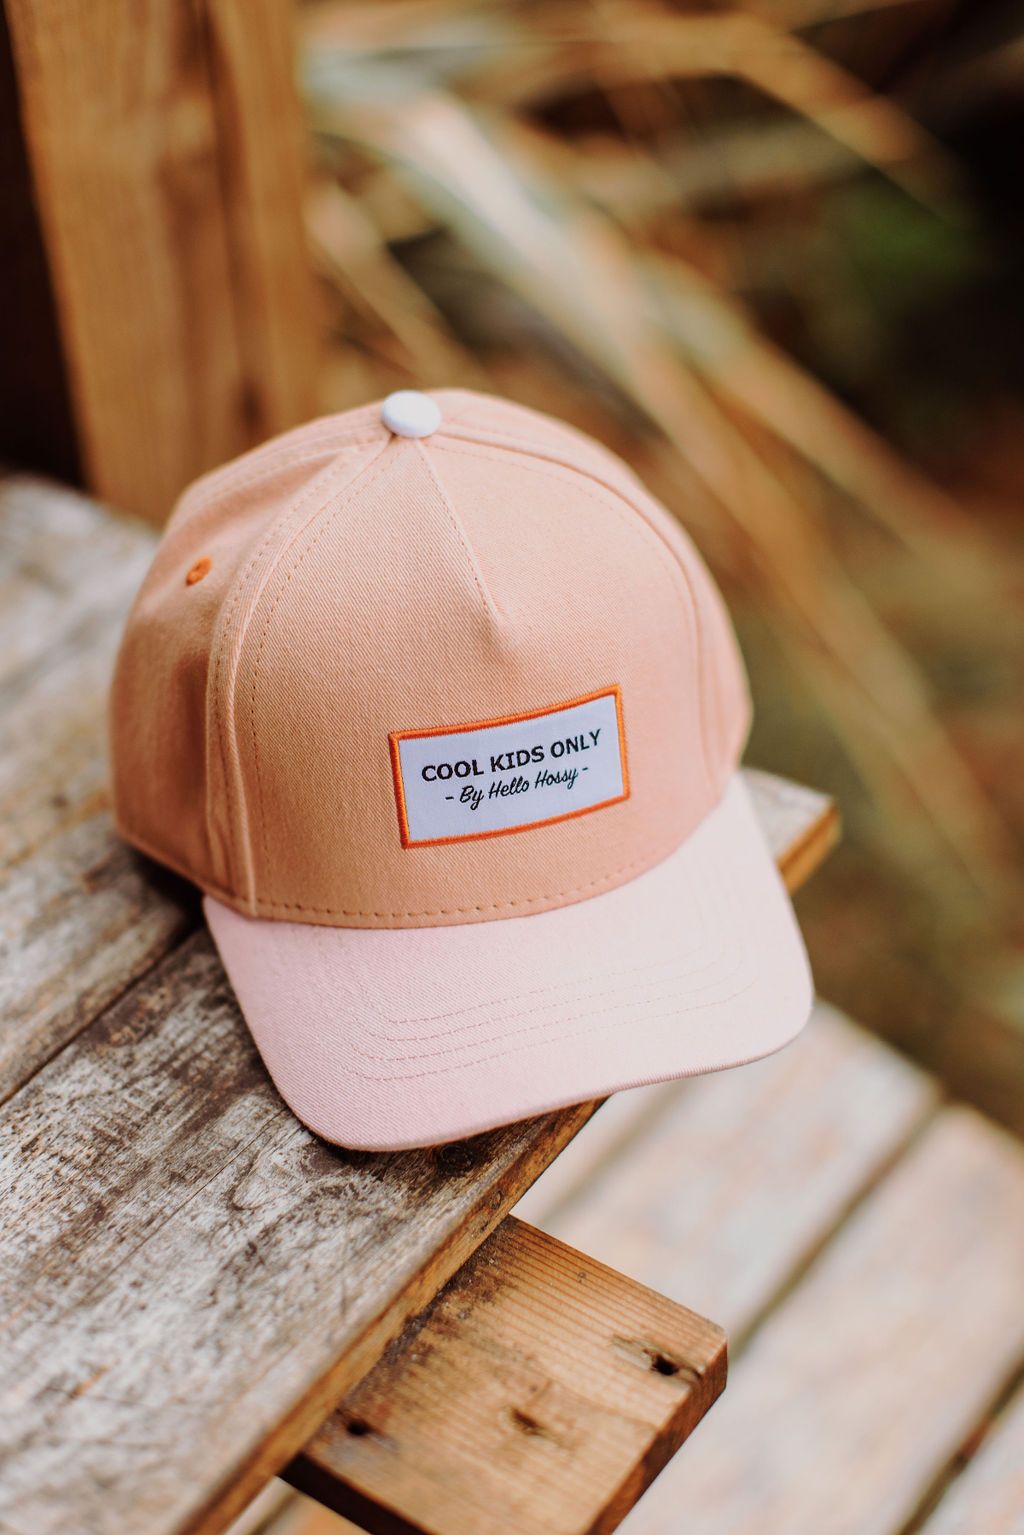 Casquette Mini Coral + 6 ans - Cool kids Only - Hello Hossy